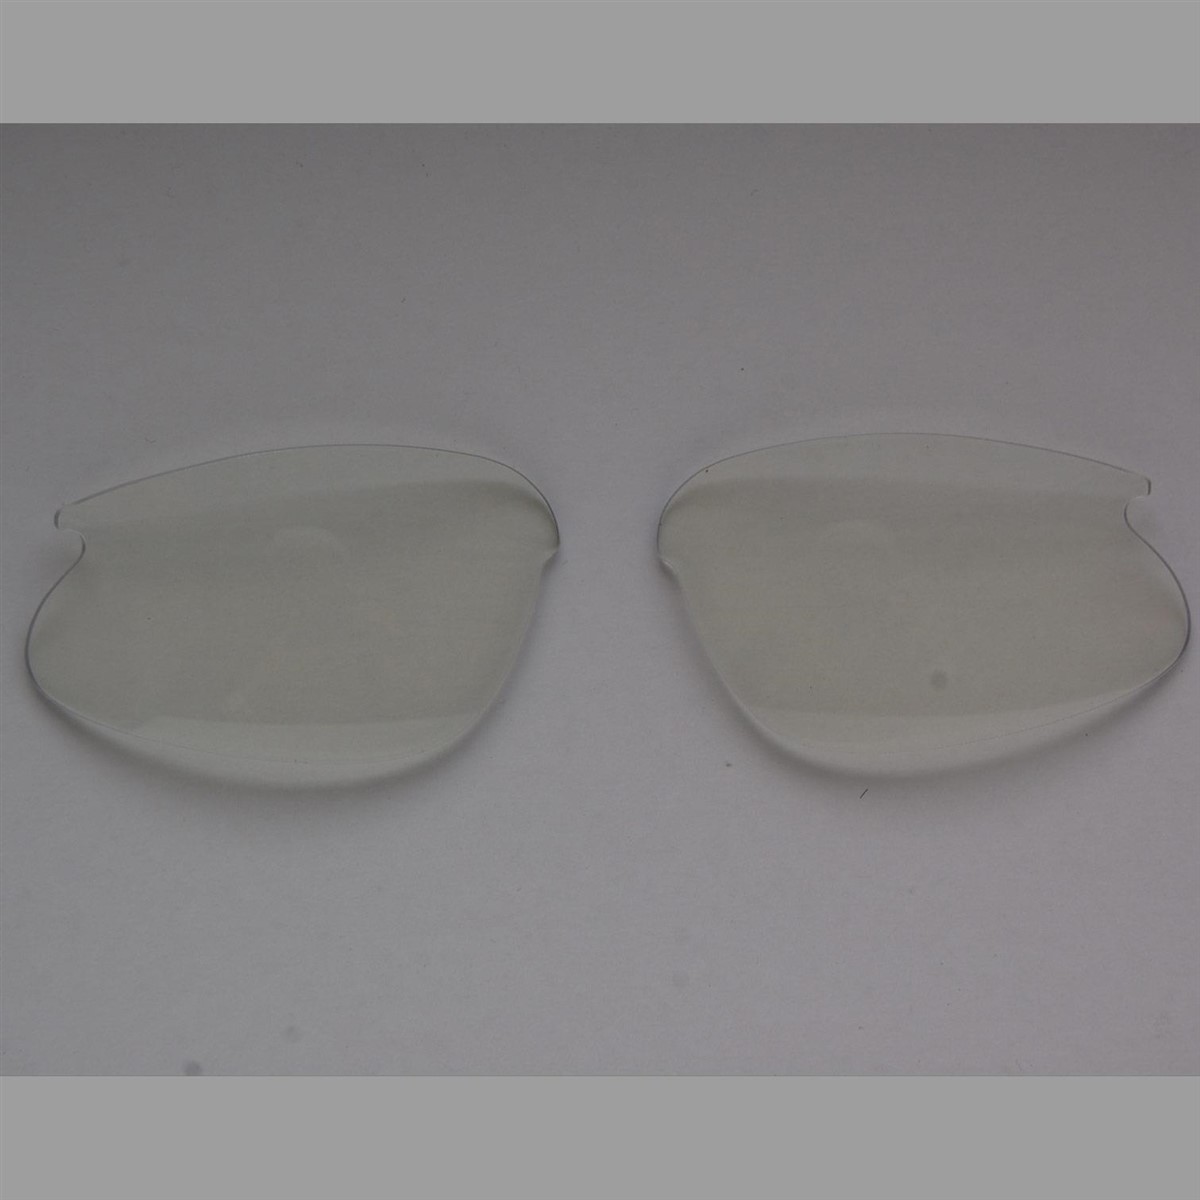 Madison Clear Lenses 99-07 (for Raiders / Ravens / Scanners / Cruise / Wishbones)